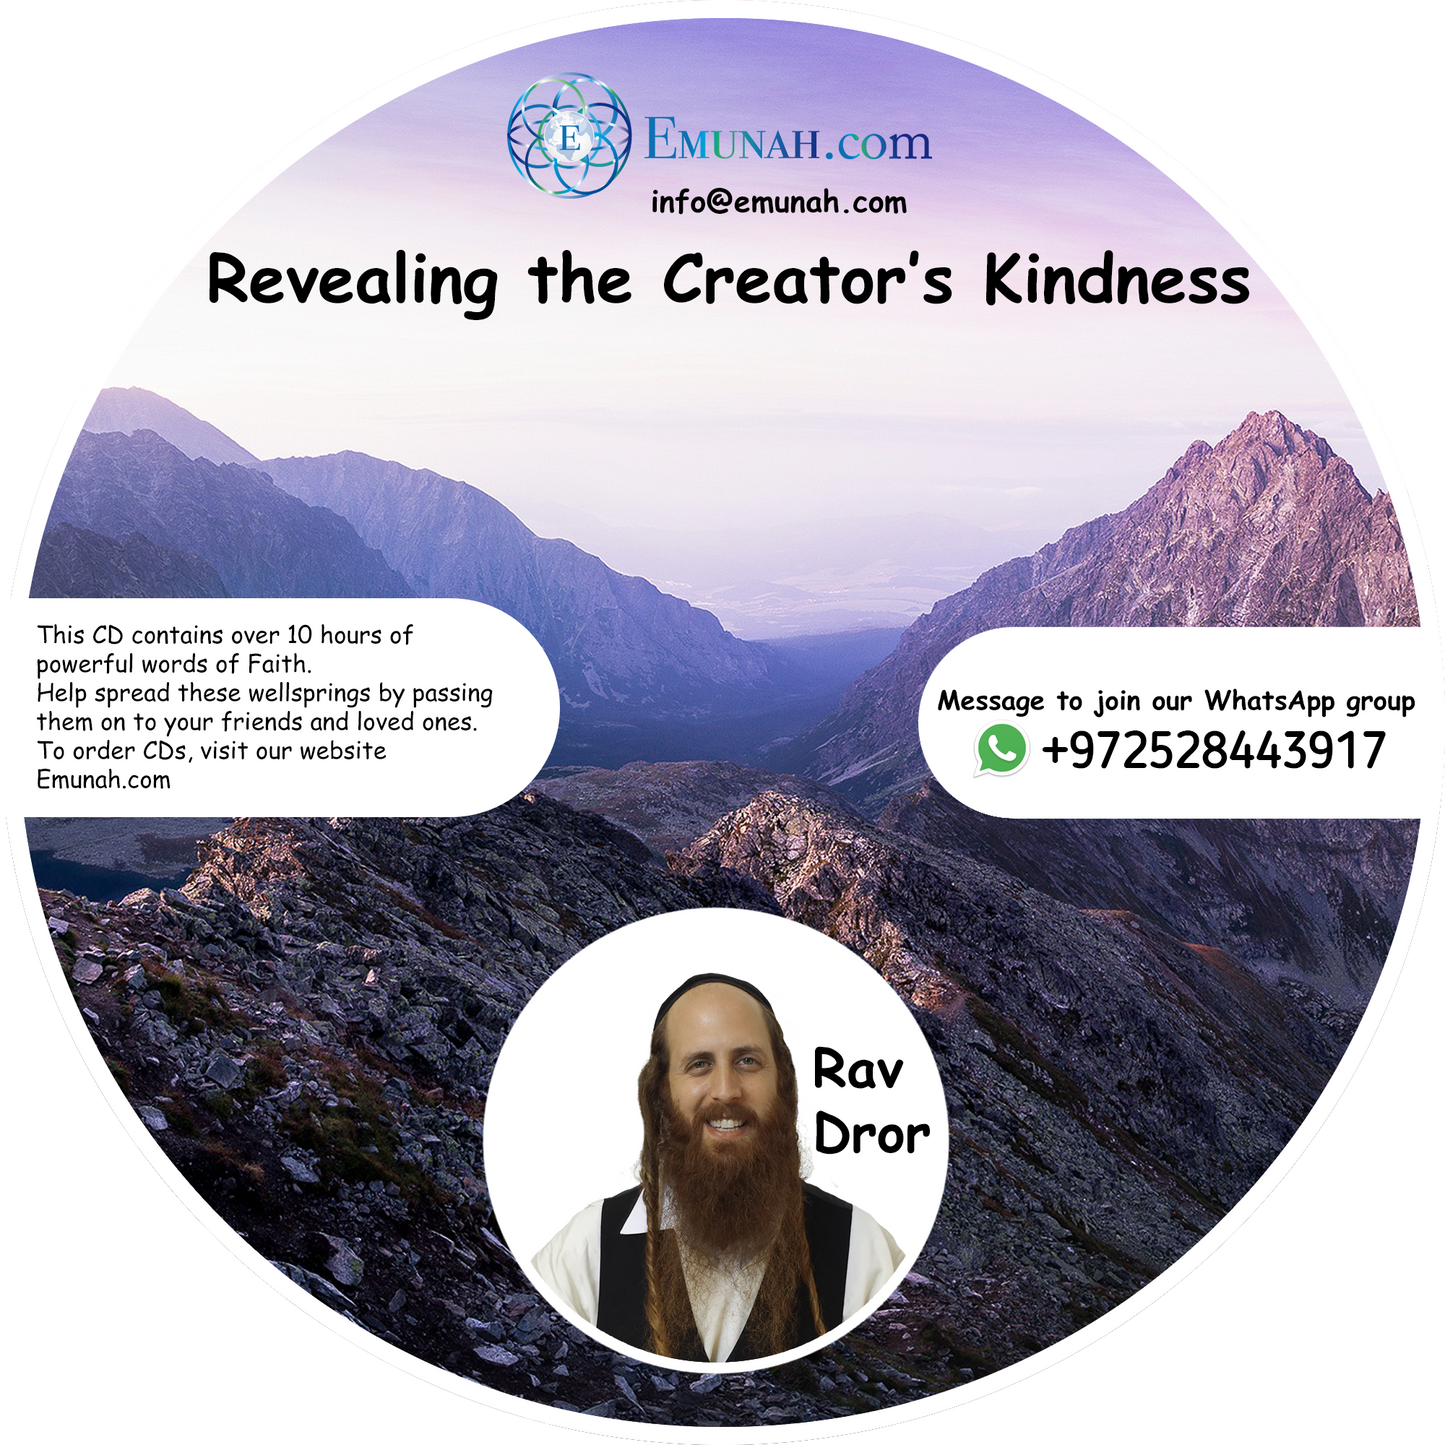 Revealing the Creator's Kindness